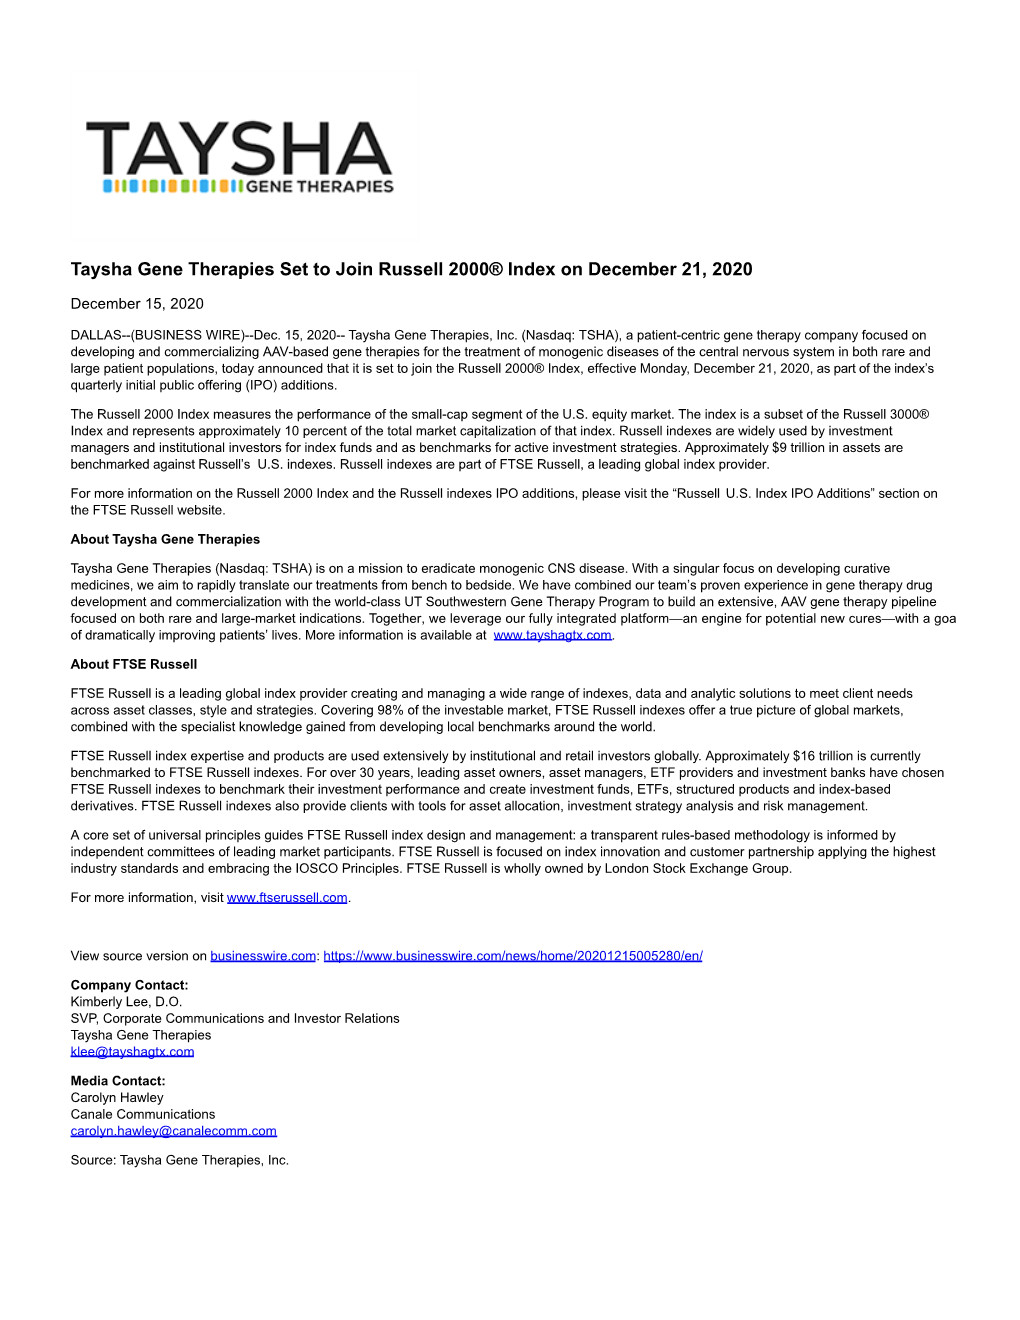 Taysha Gene Therapies Set to Join Russell 2000® Index on December 21, 2020